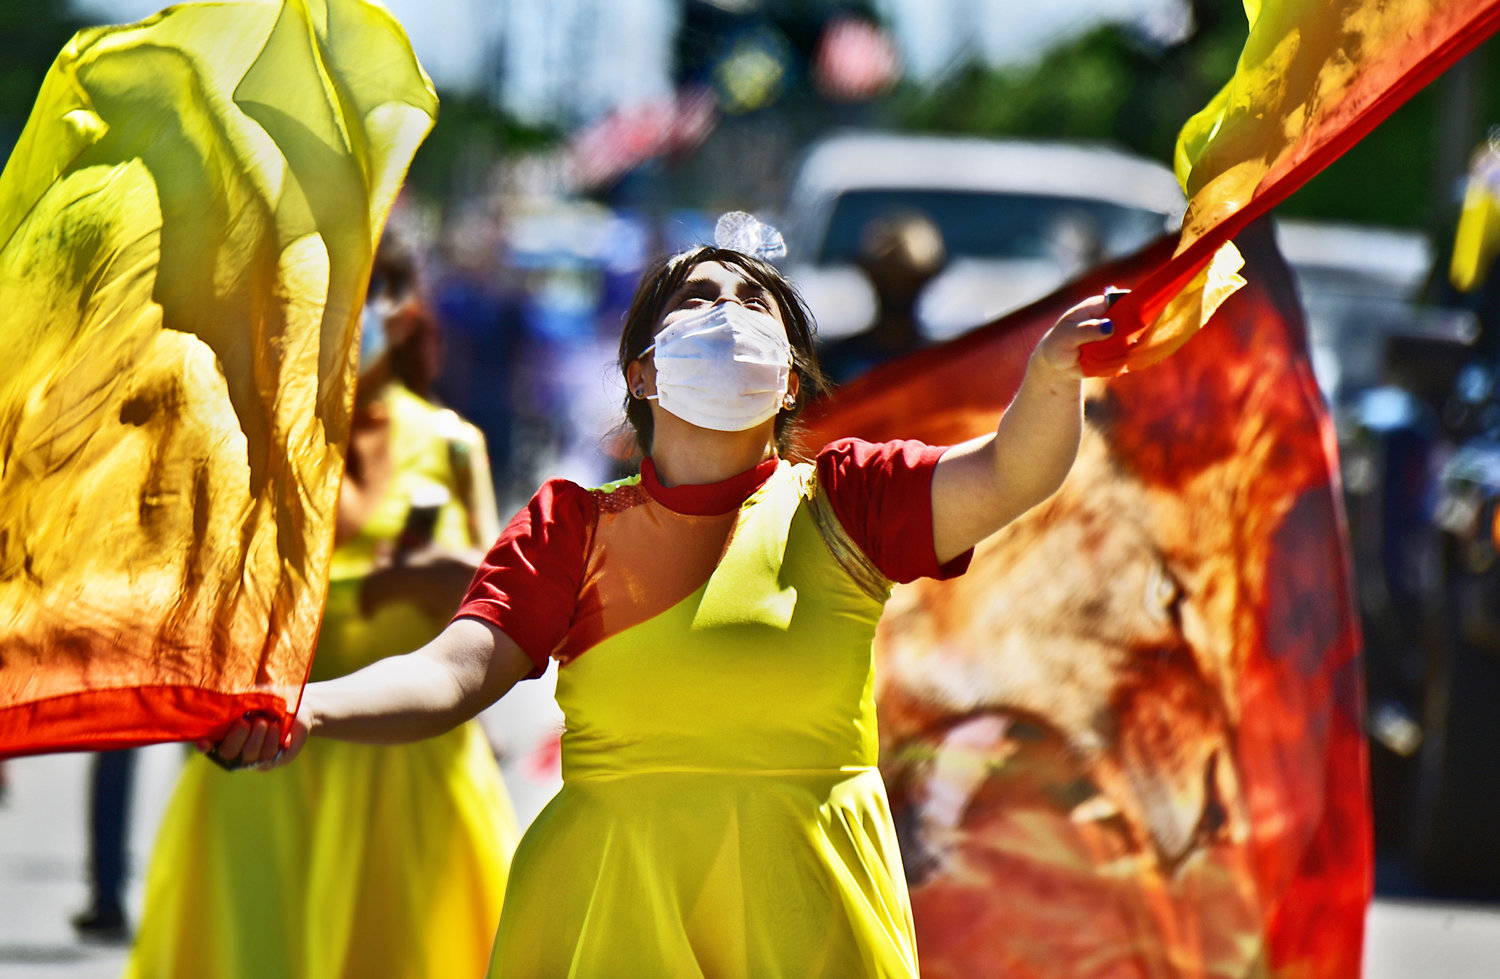 A member of the Iglesia Centro Familiar Cristiano Christian Church in Rochester dances and swirls tapestries during the Swede Day parade in downtown Rochester on Saturday, June 19.